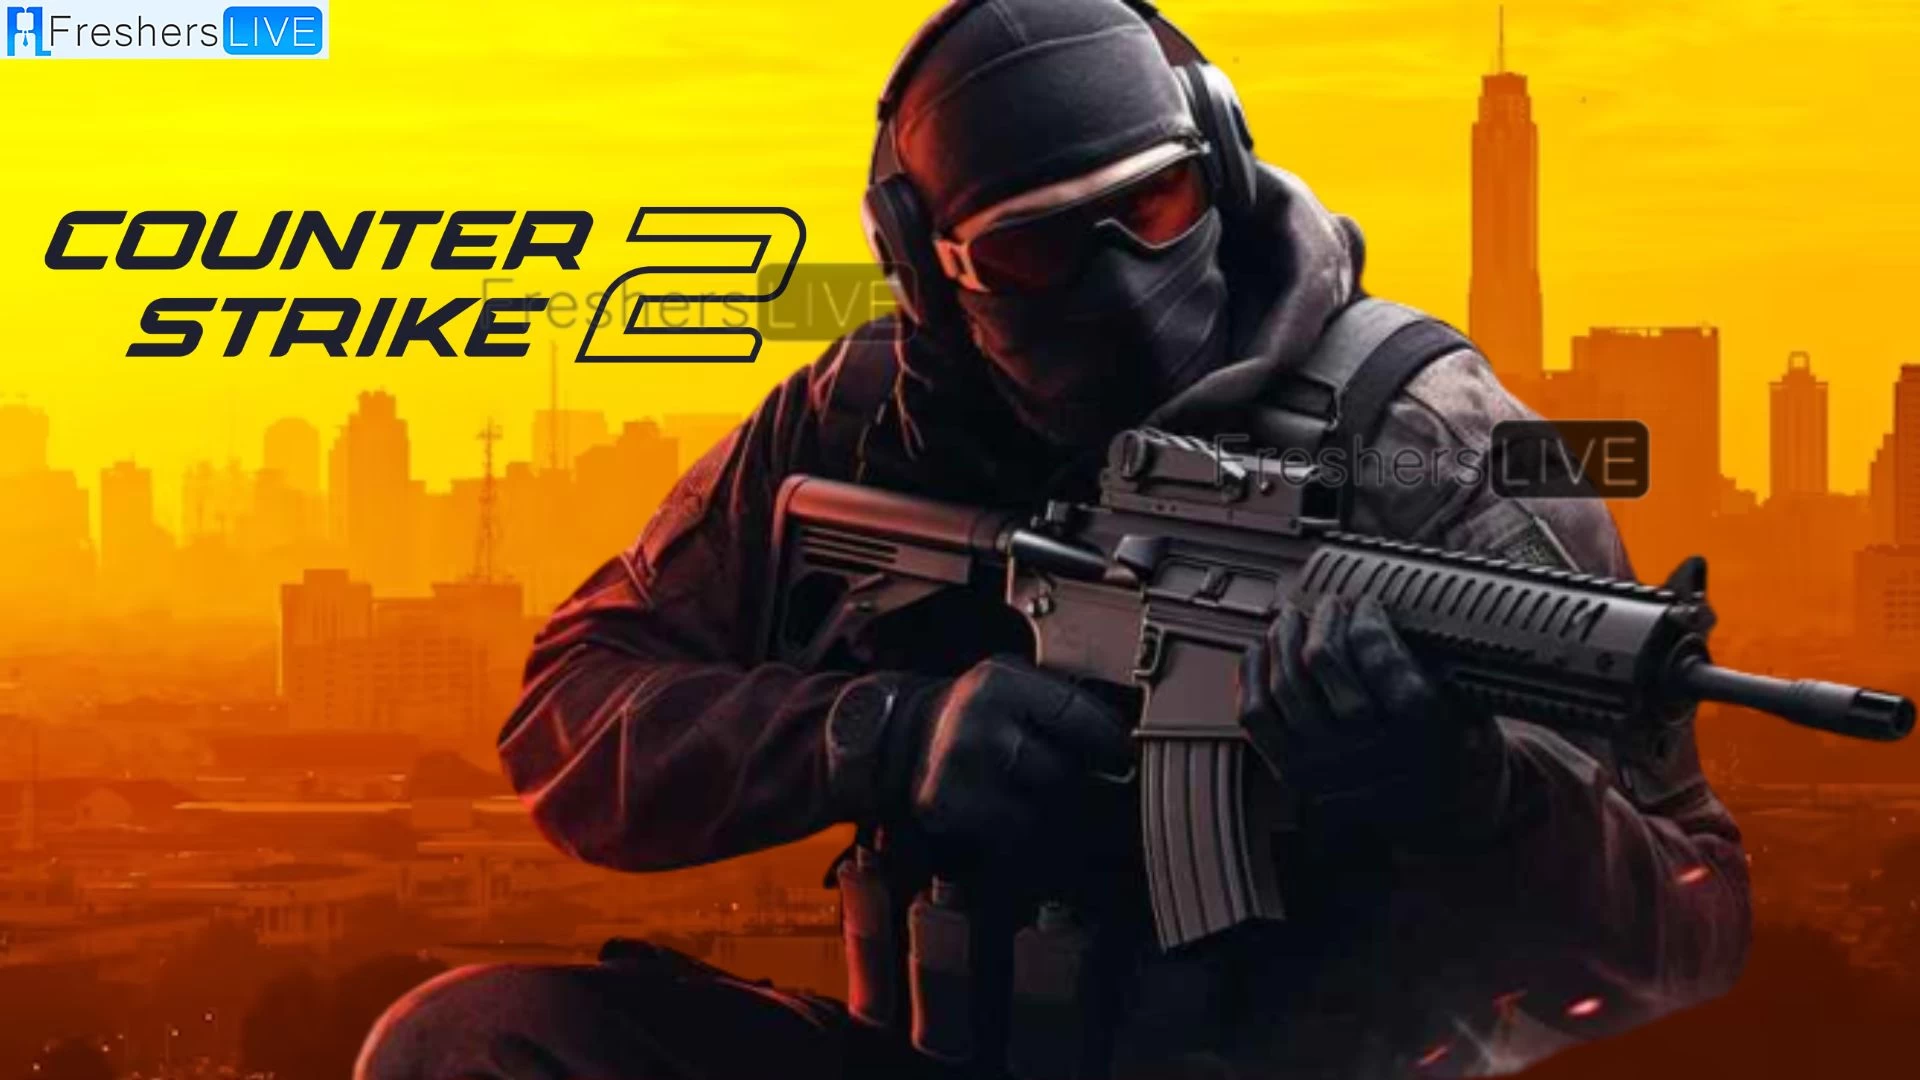 How to Play Counter-strike 2? Find Out Here